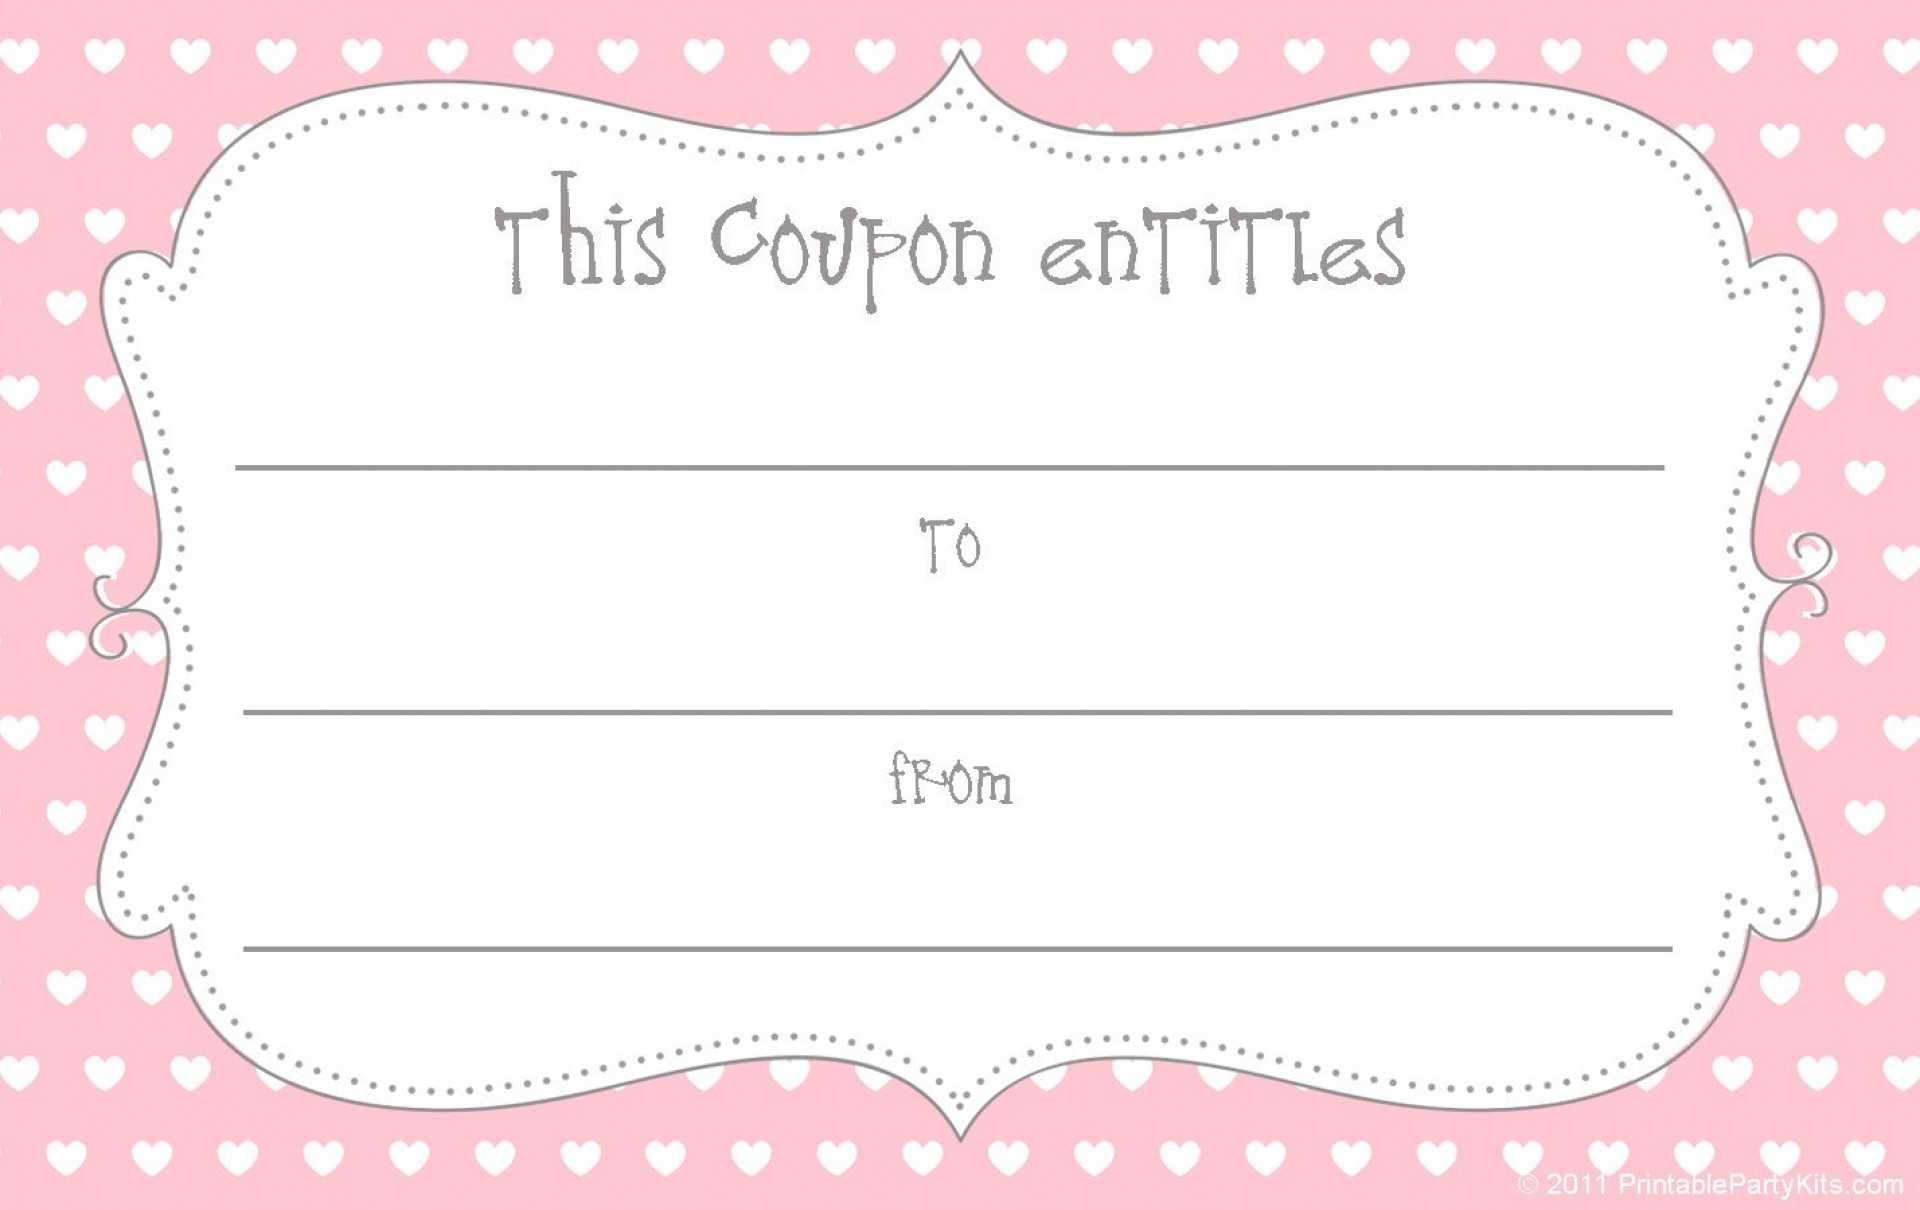 027 Free Coupon Maker Template Blank Exceptional Ideas Throughout Blank Coupon Template Printable